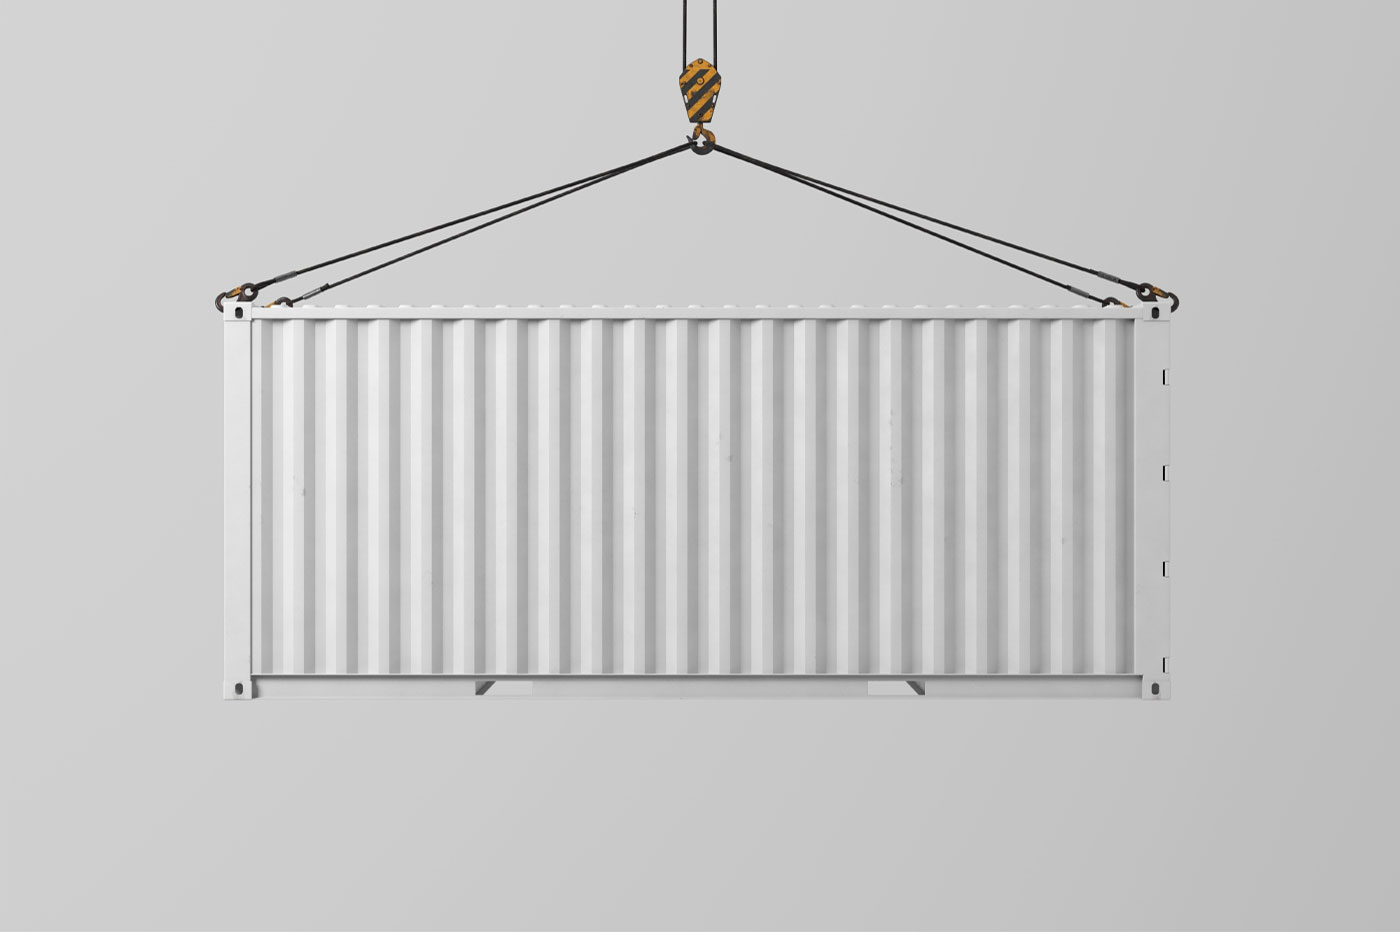 Shipping Container Hung on the Hook in the Front View Mockup FREE PSD